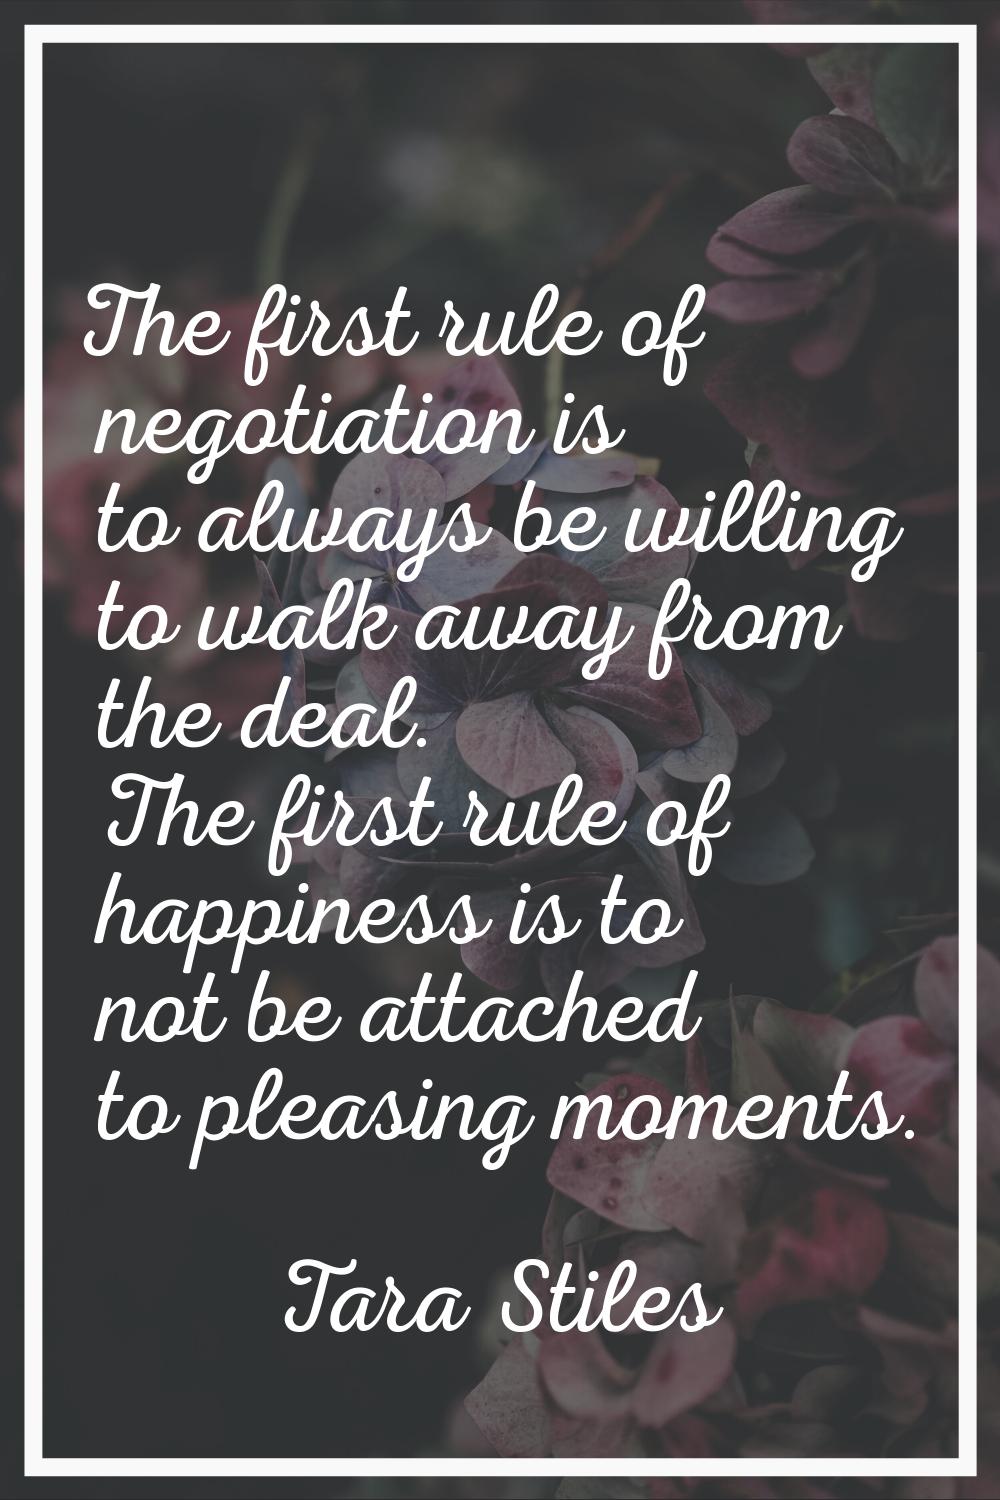 The first rule of negotiation is to always be willing to walk away from the deal. The first rule of